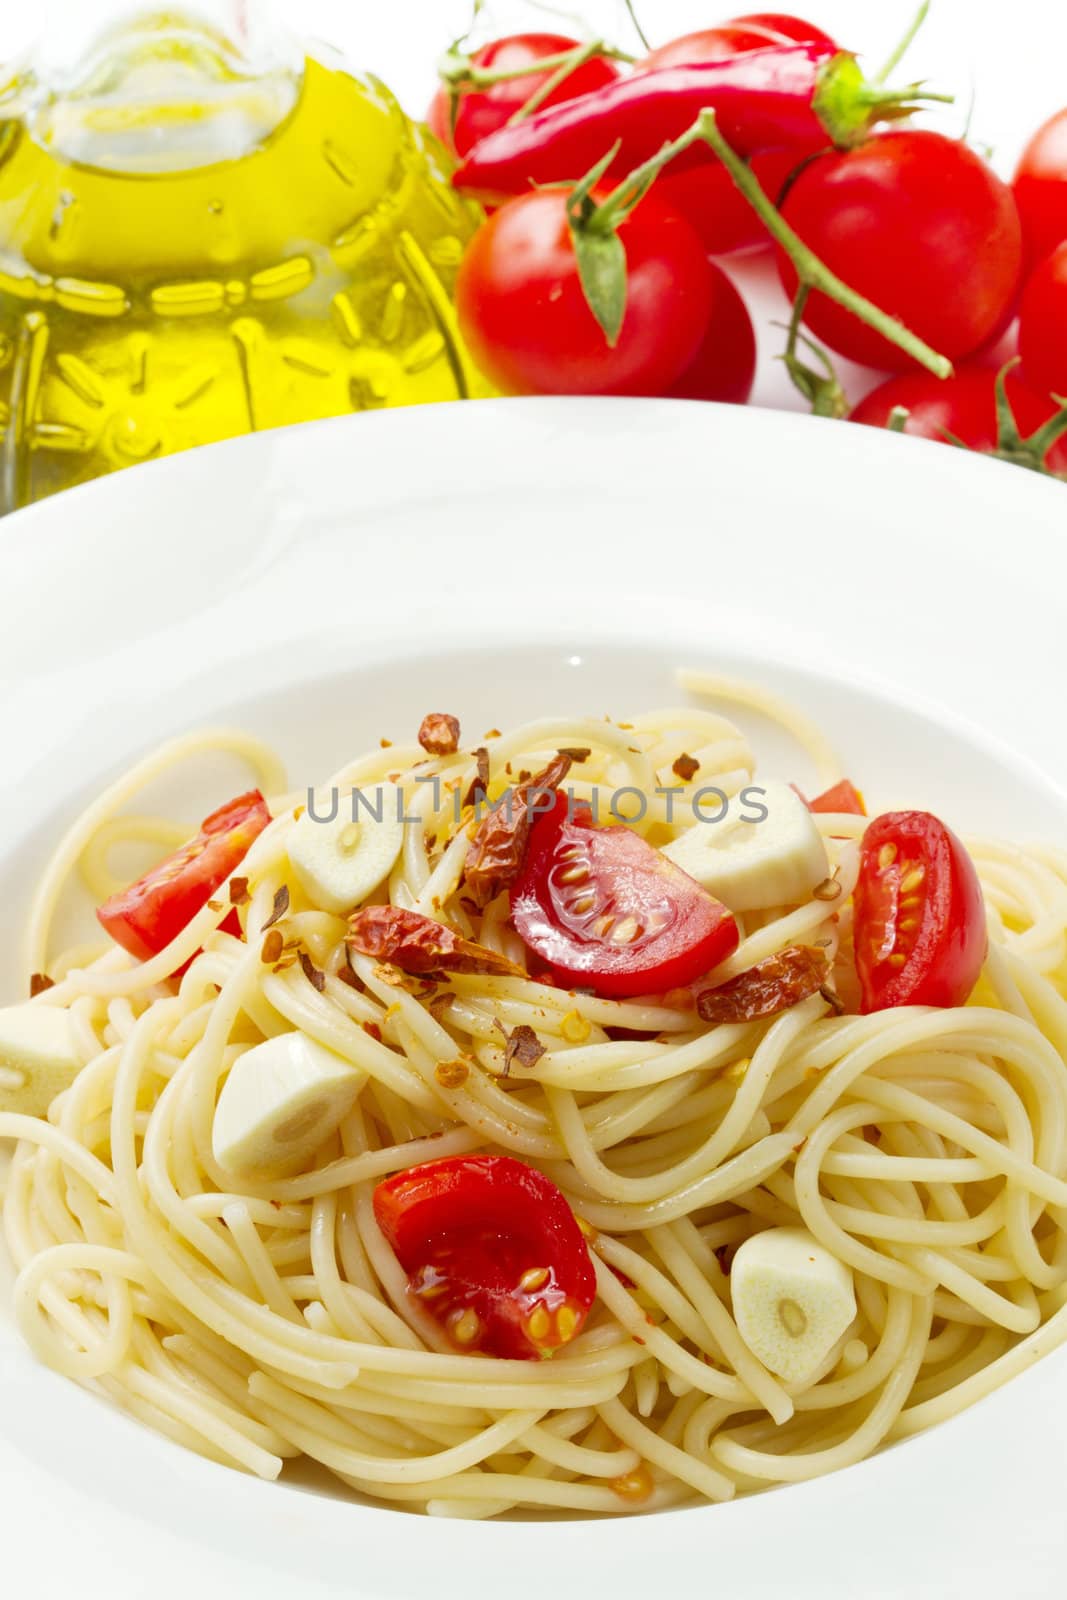 pasta garlic olive oil and red chili pepper by lsantilli